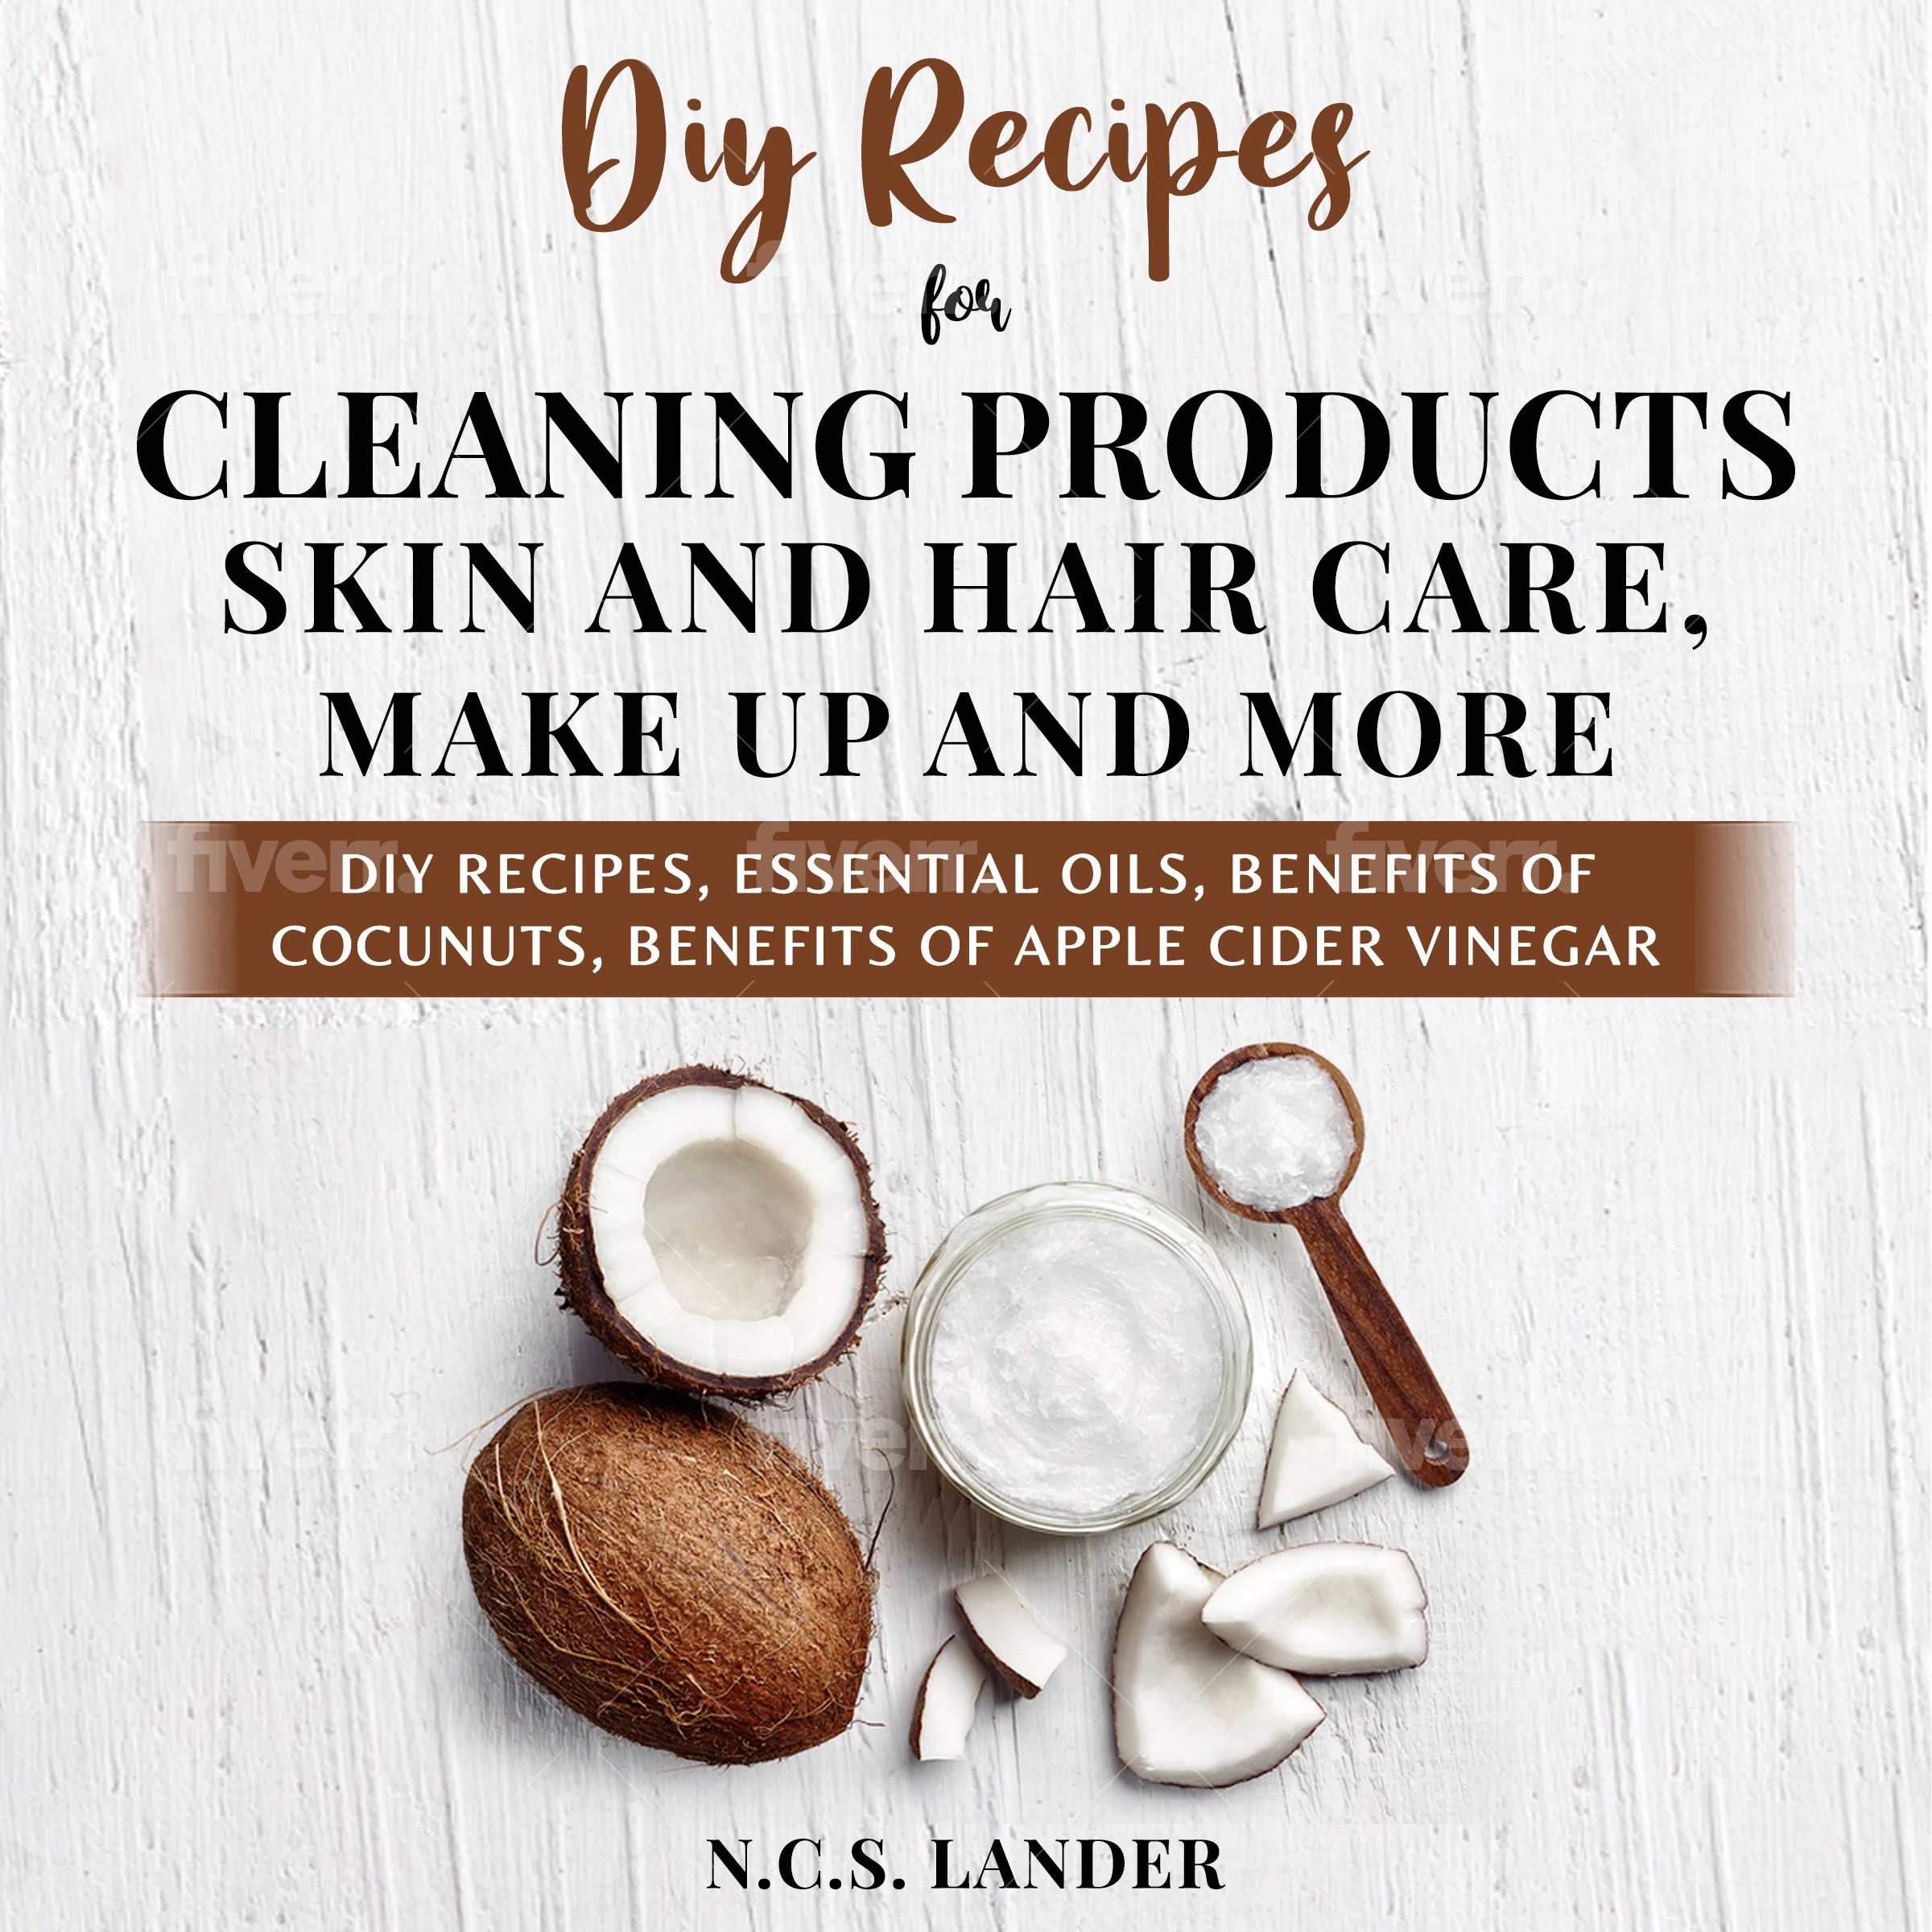 Diy Recipes For Cleaning Products, Skin And Hair Care, Make Up and More Audiobook by N C.S Lander